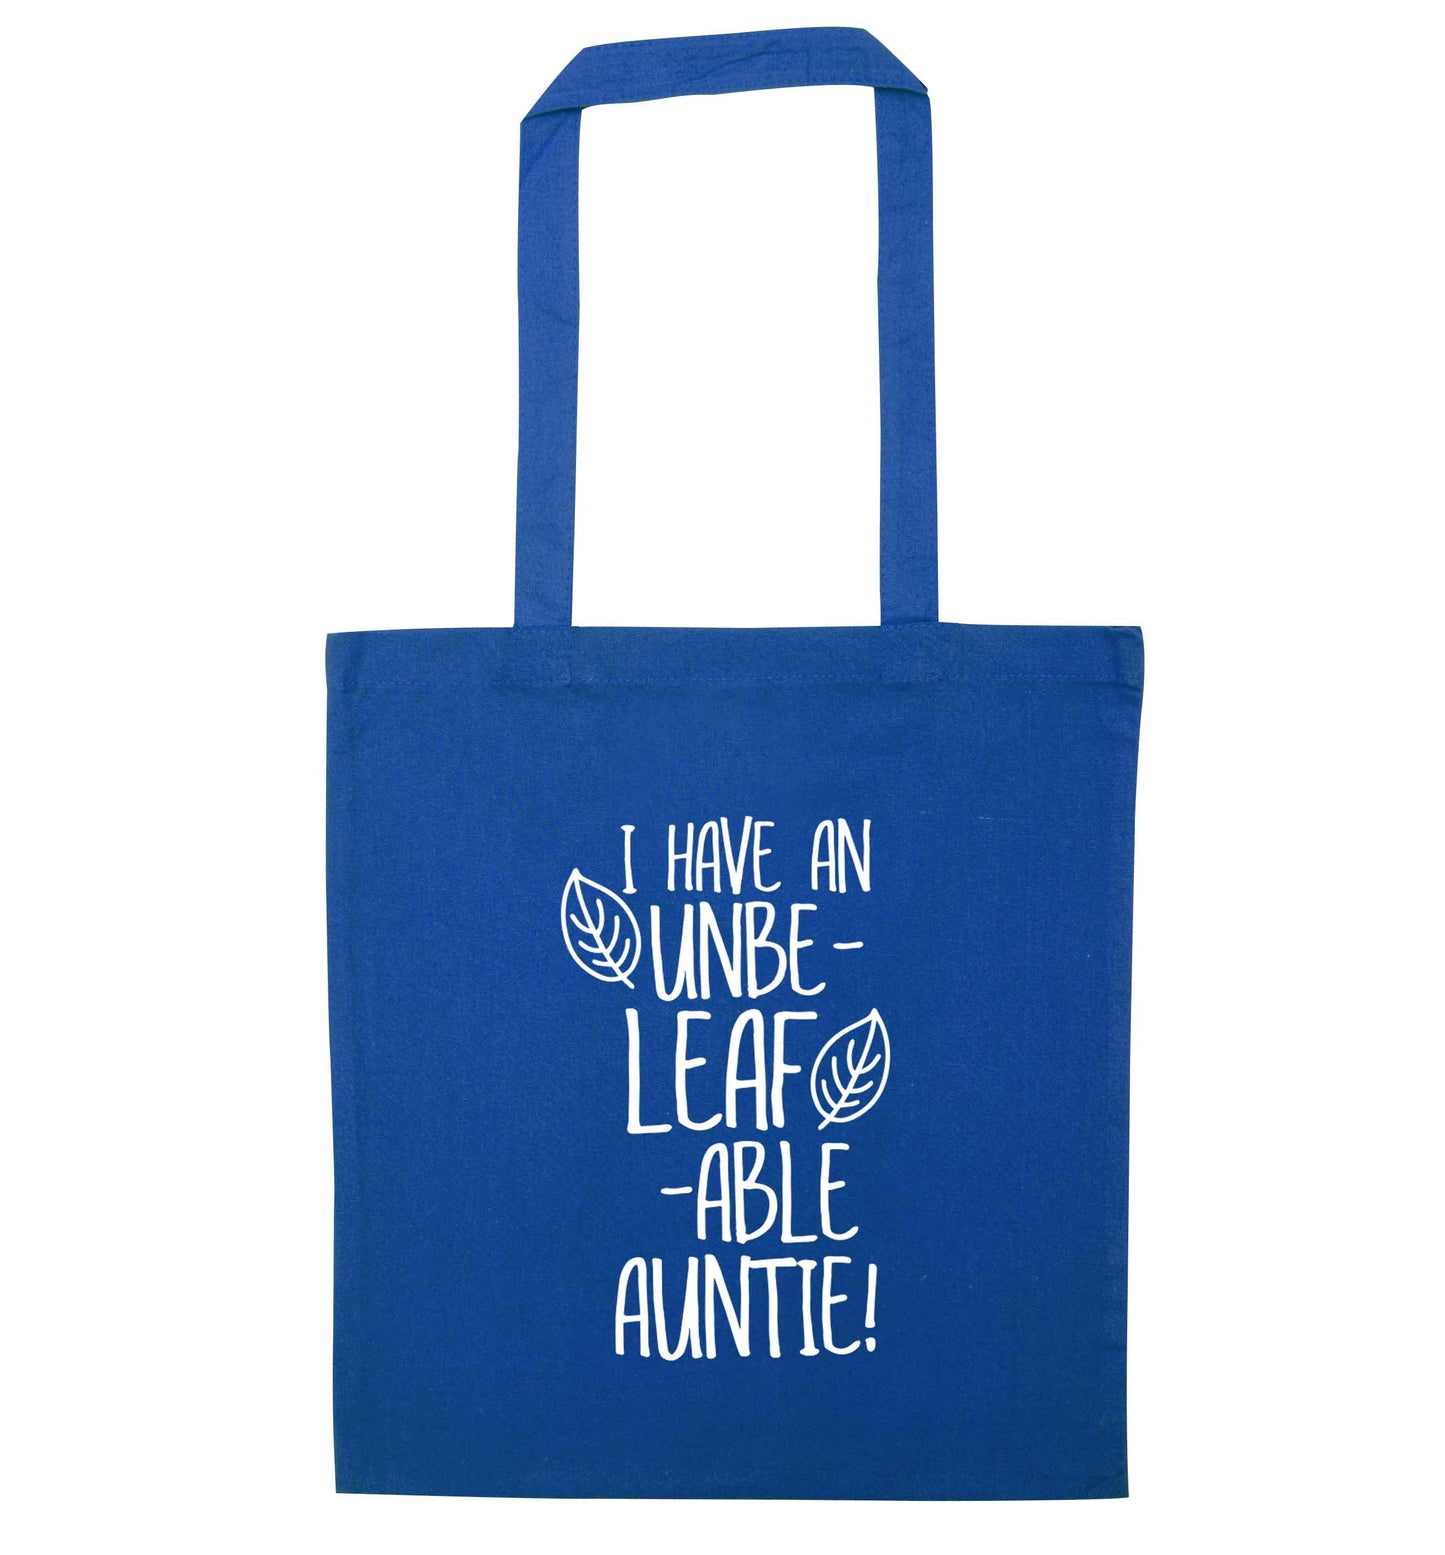 I have an unbe-leaf-able auntie blue tote bag